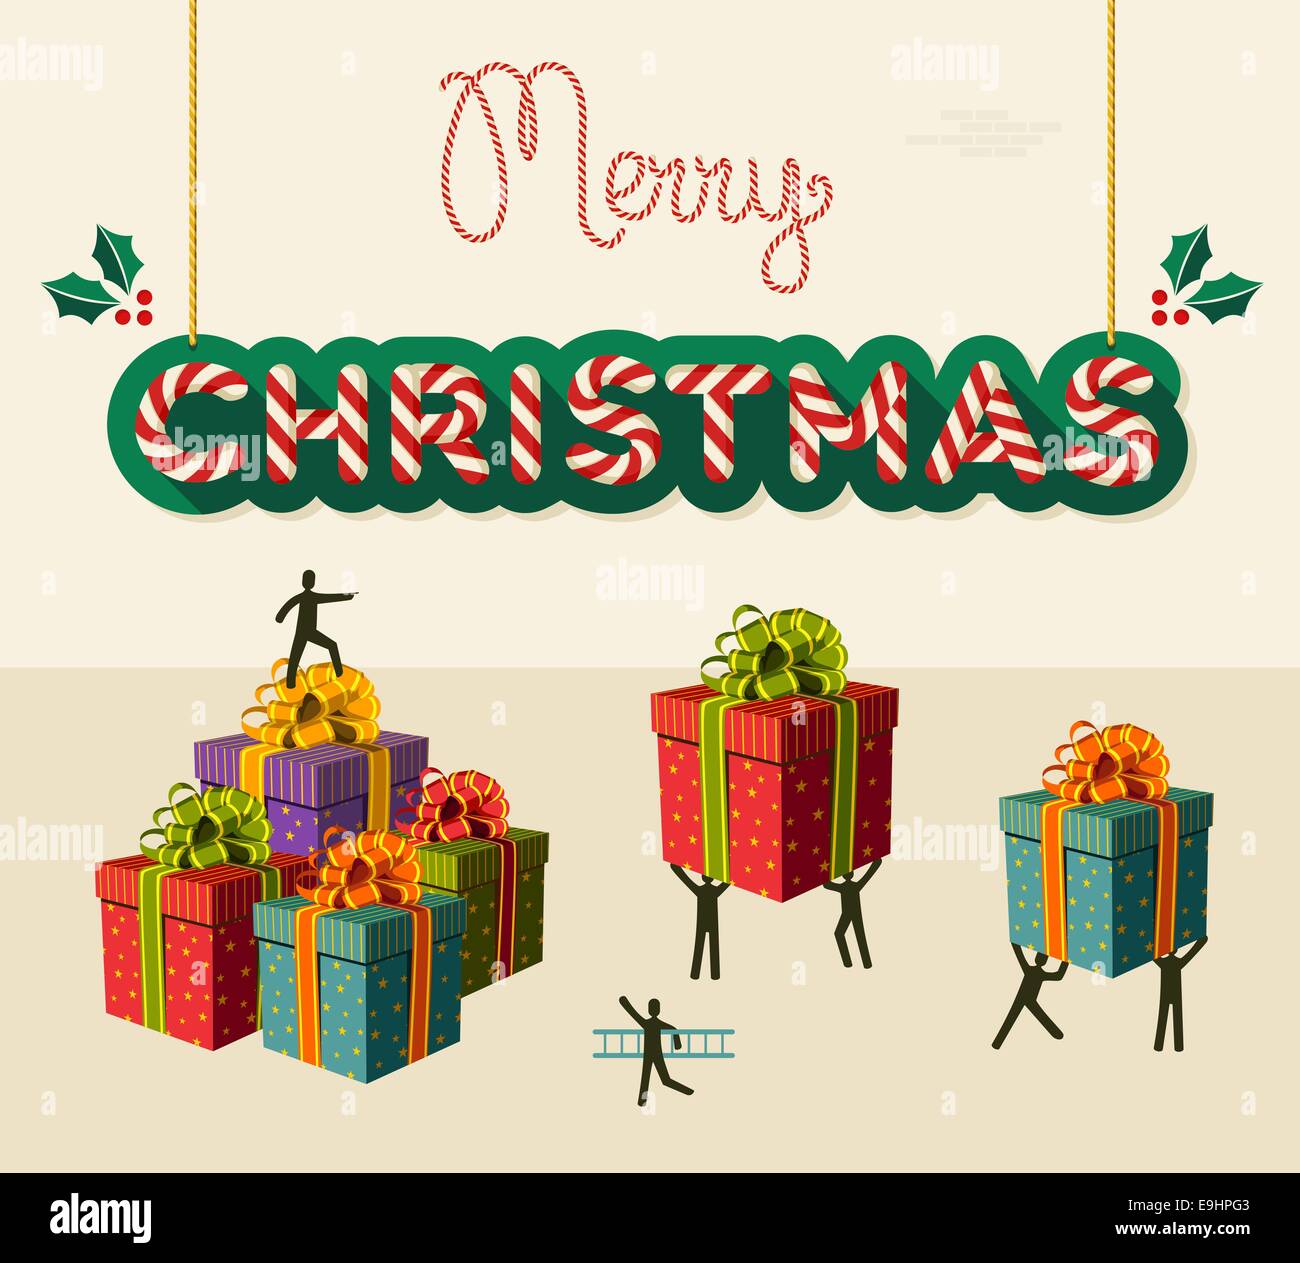 Xmas teamwork prepare gifts for Christmas business greeting card. EPS10 vector illustration organized in layers for easy editing Stock Photo